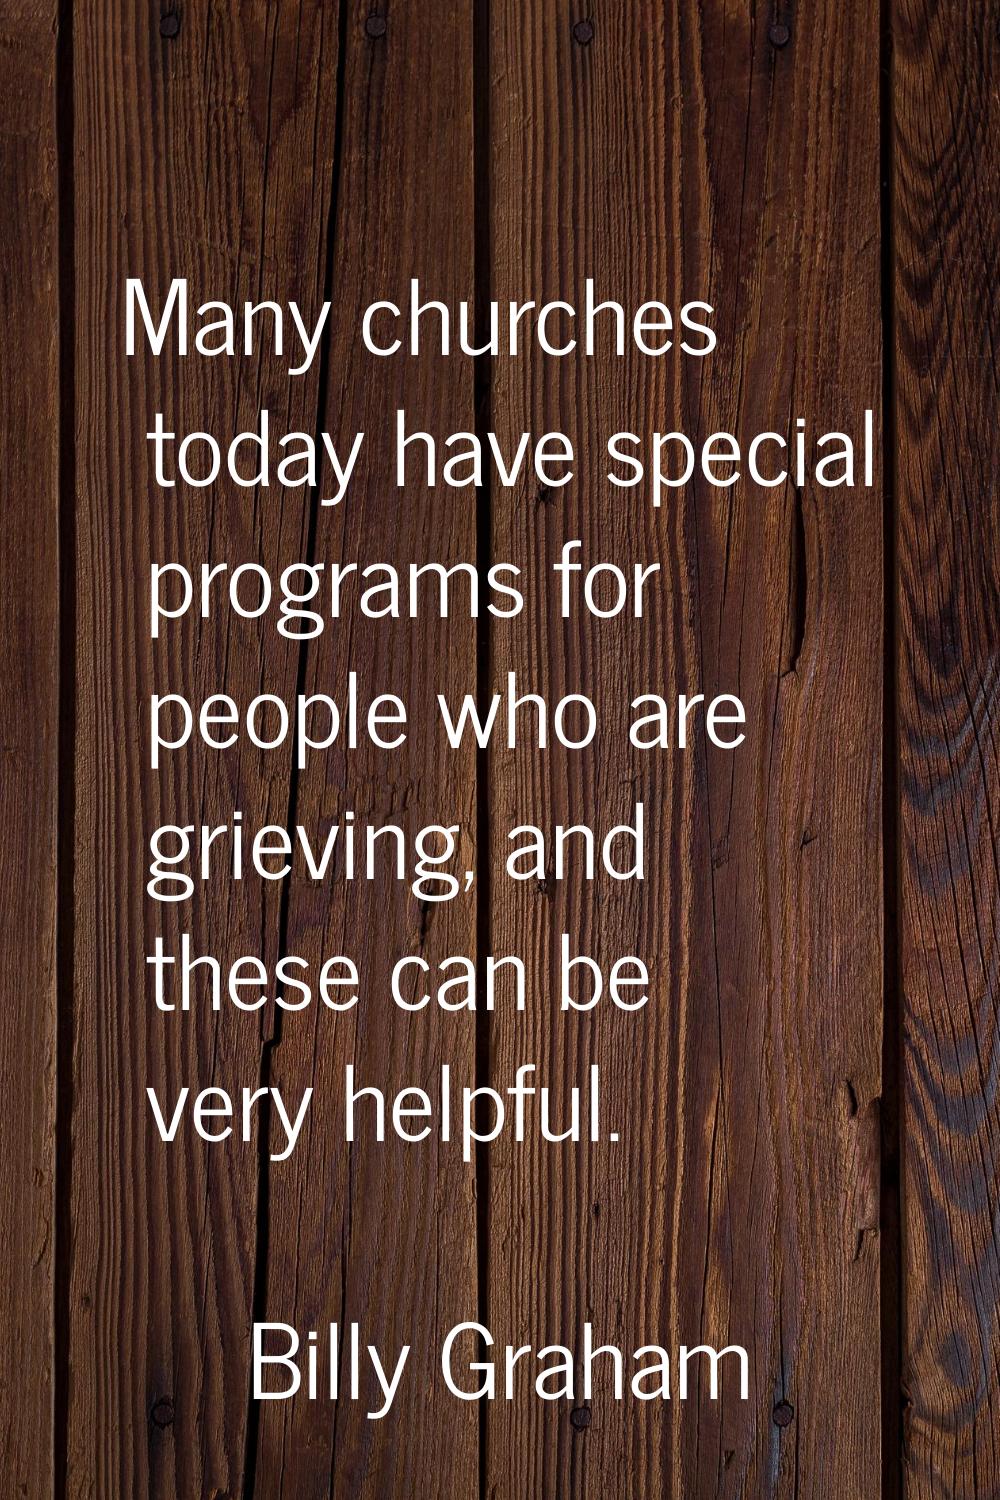 Many churches today have special programs for people who are grieving, and these can be very helpfu